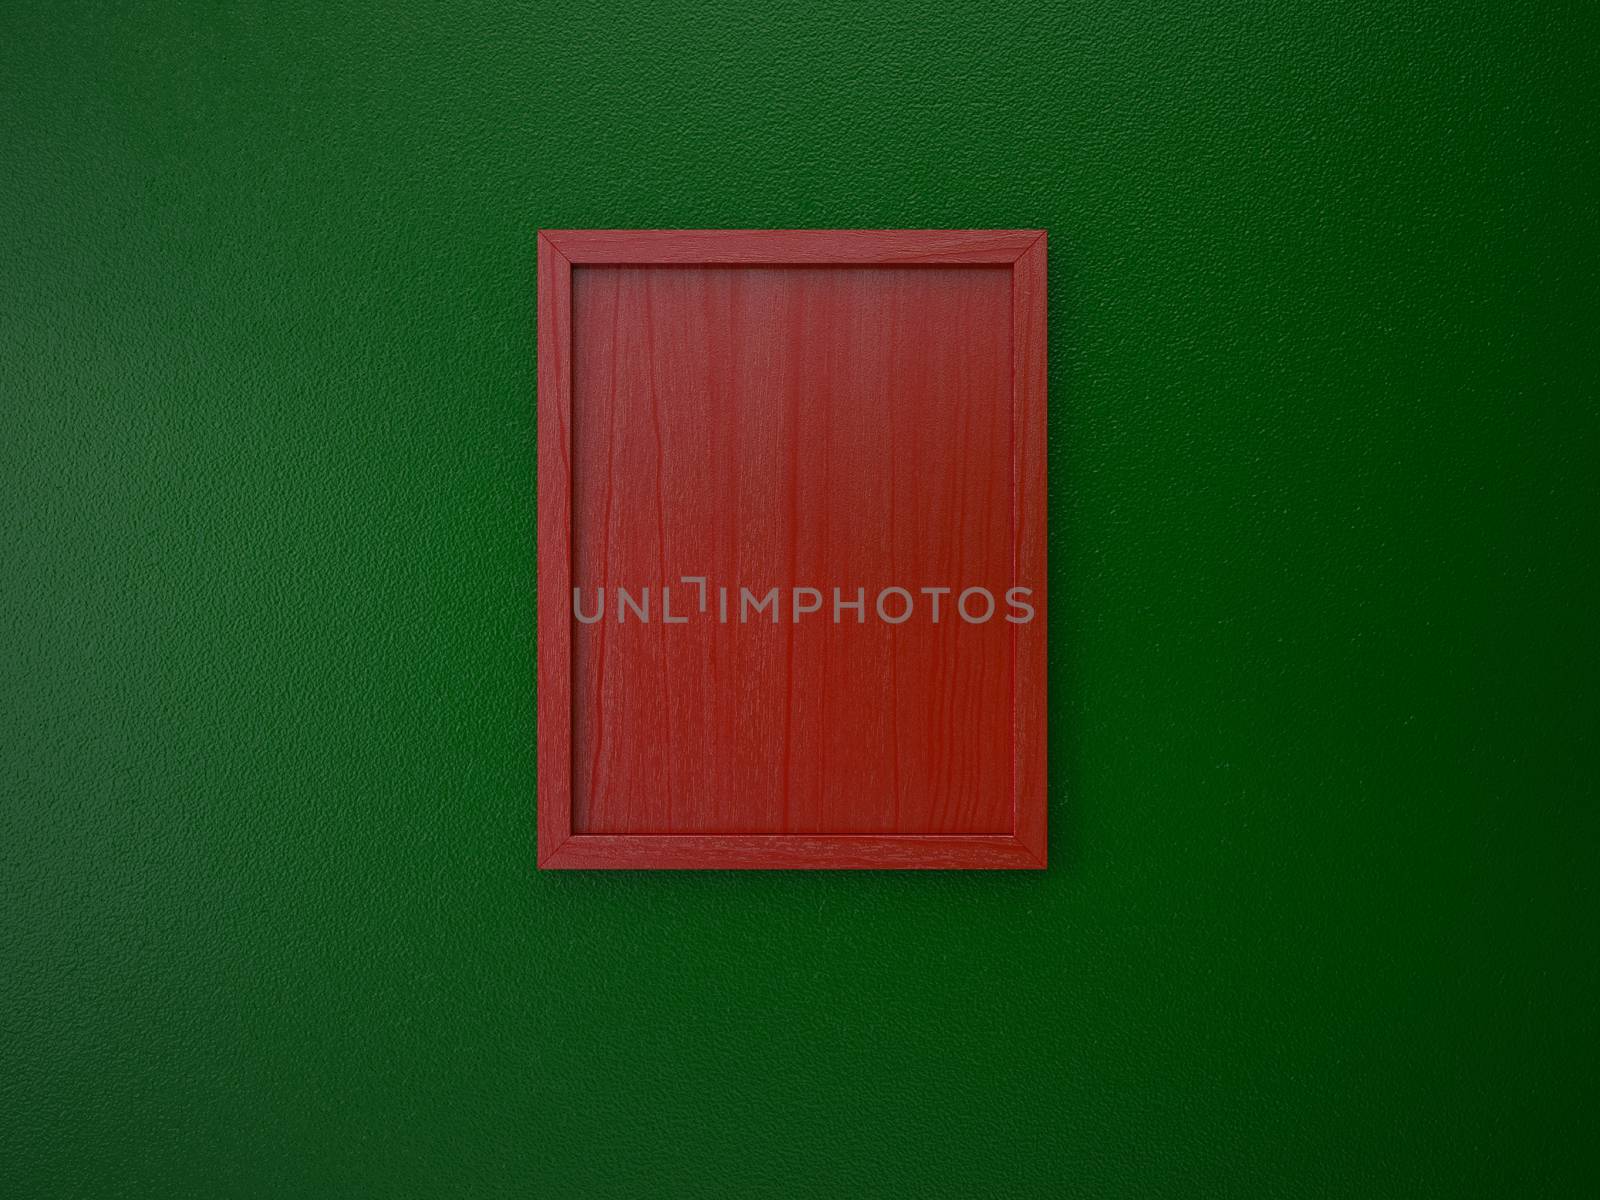 blank frame on interior wall red and green ,christmas tone color